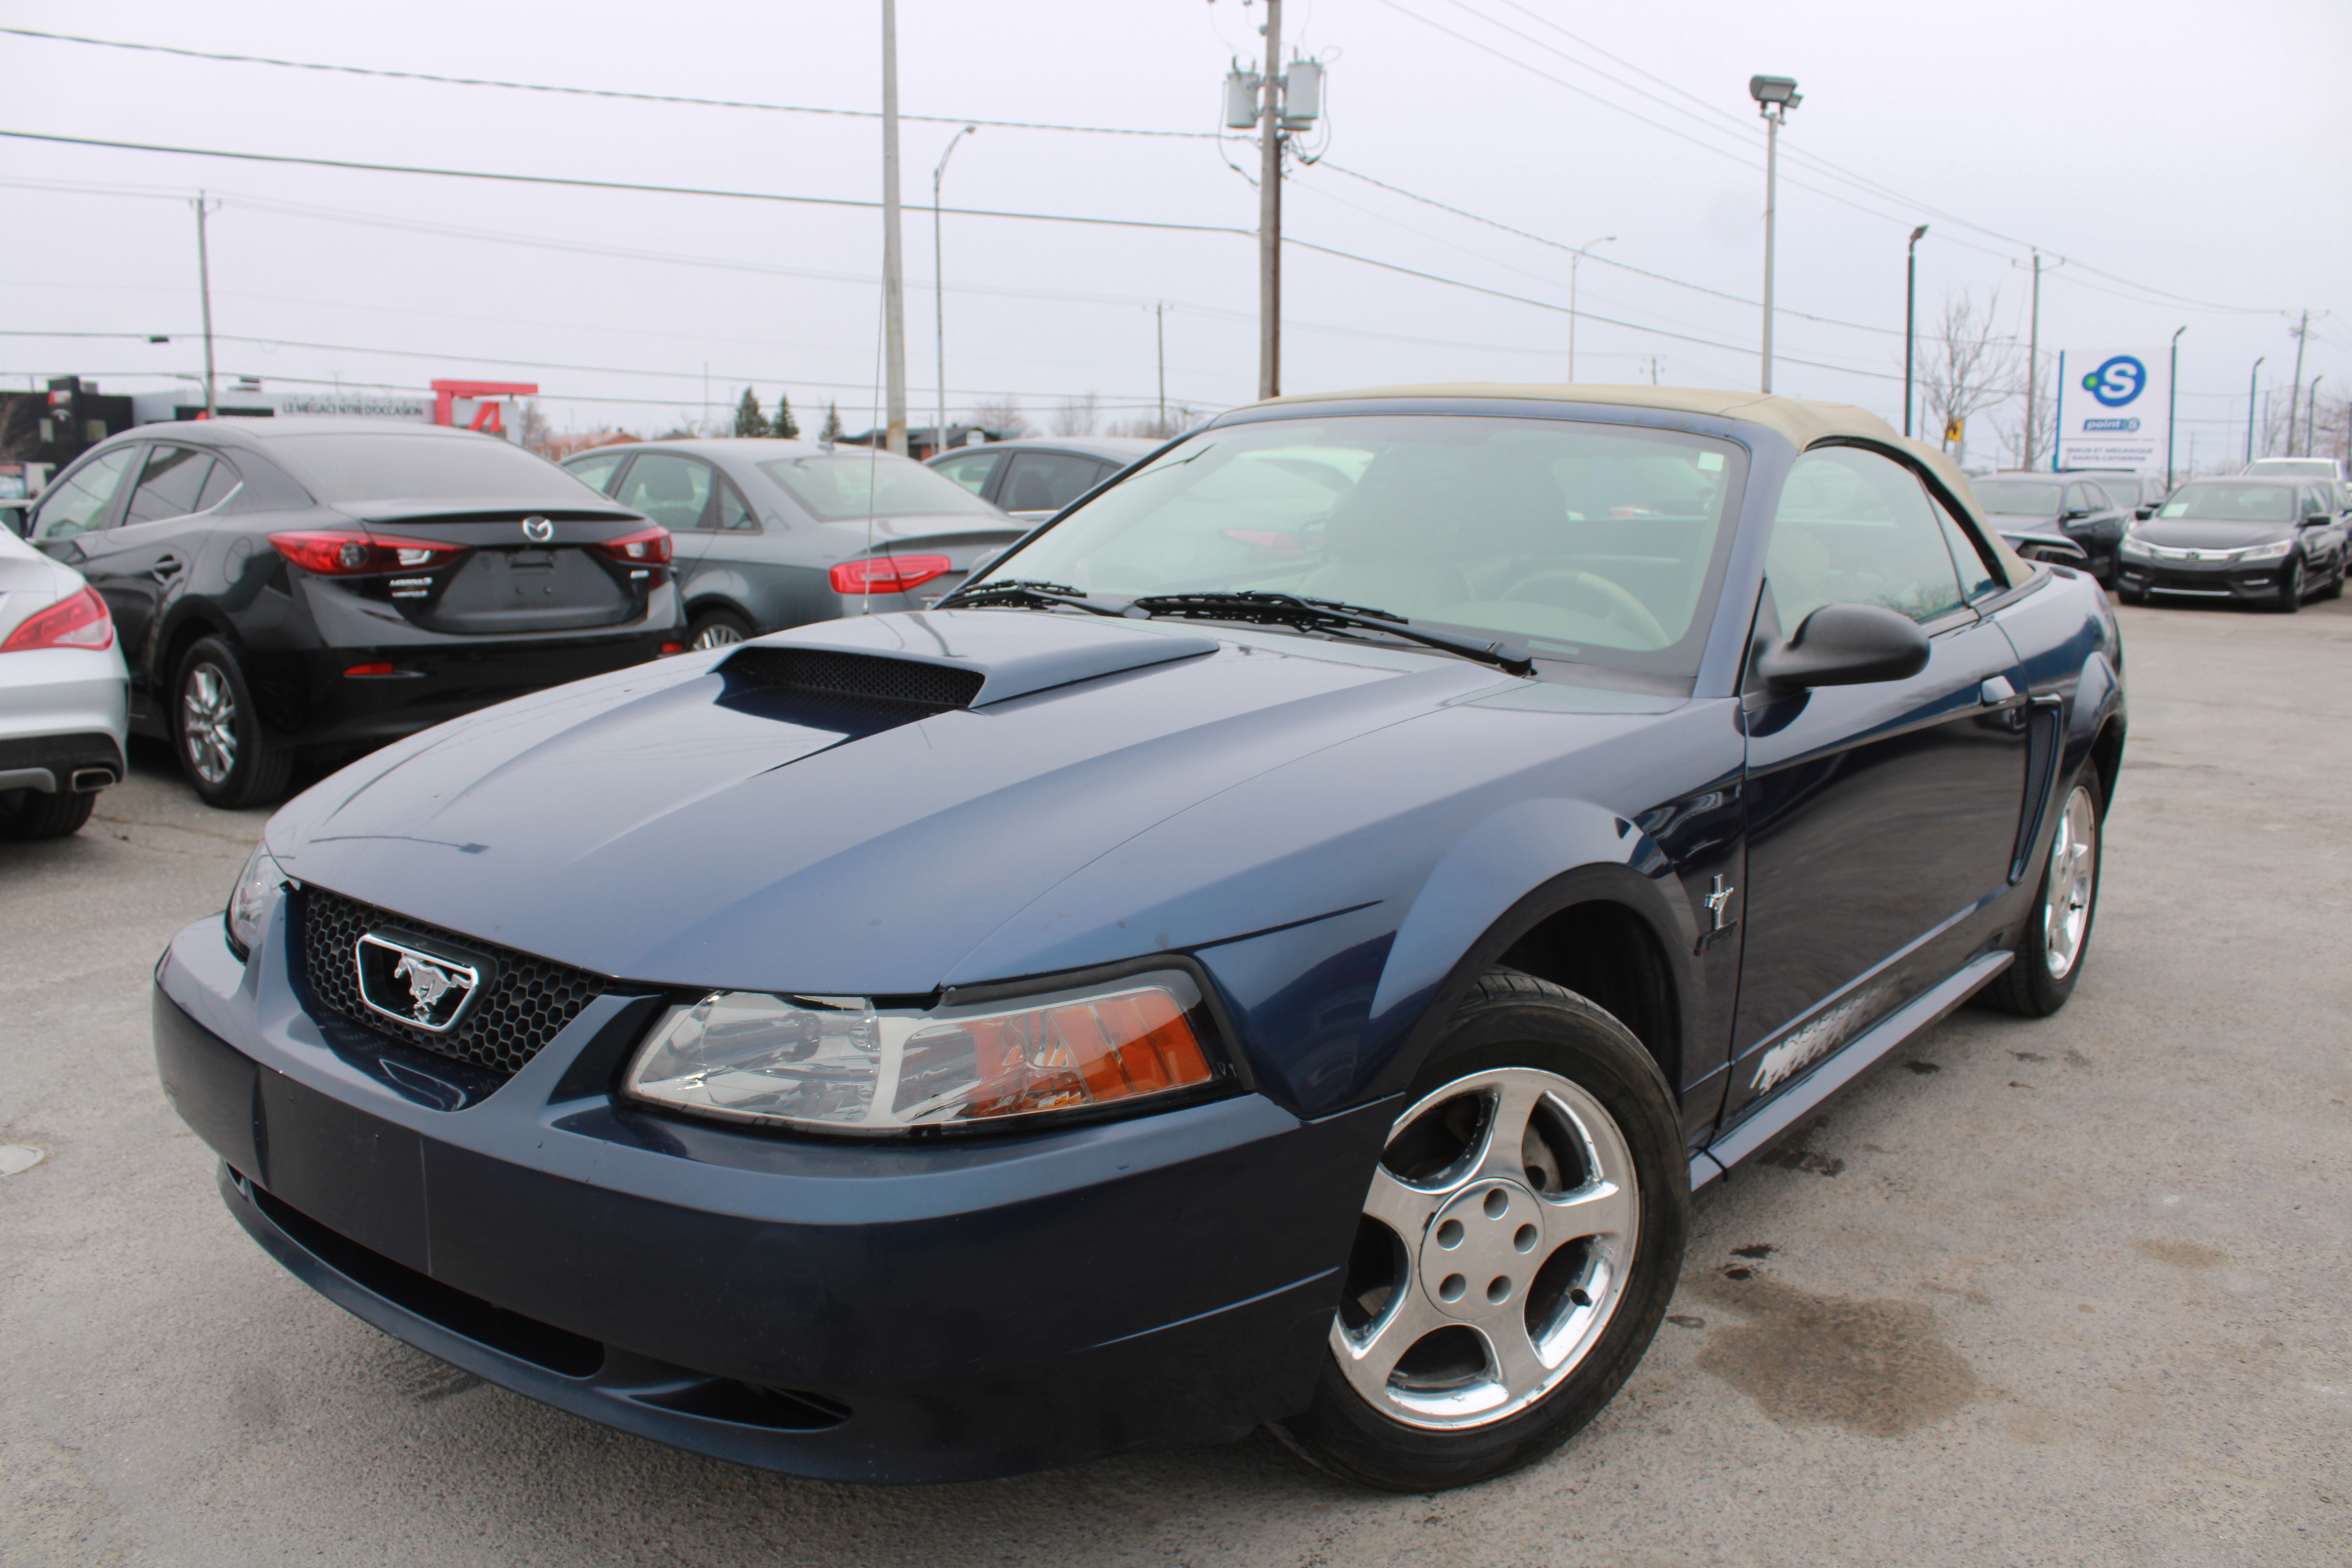 2003 Ford Mustang Convertible, MAGS, CUIR, CRUISE CONTROL, A/C